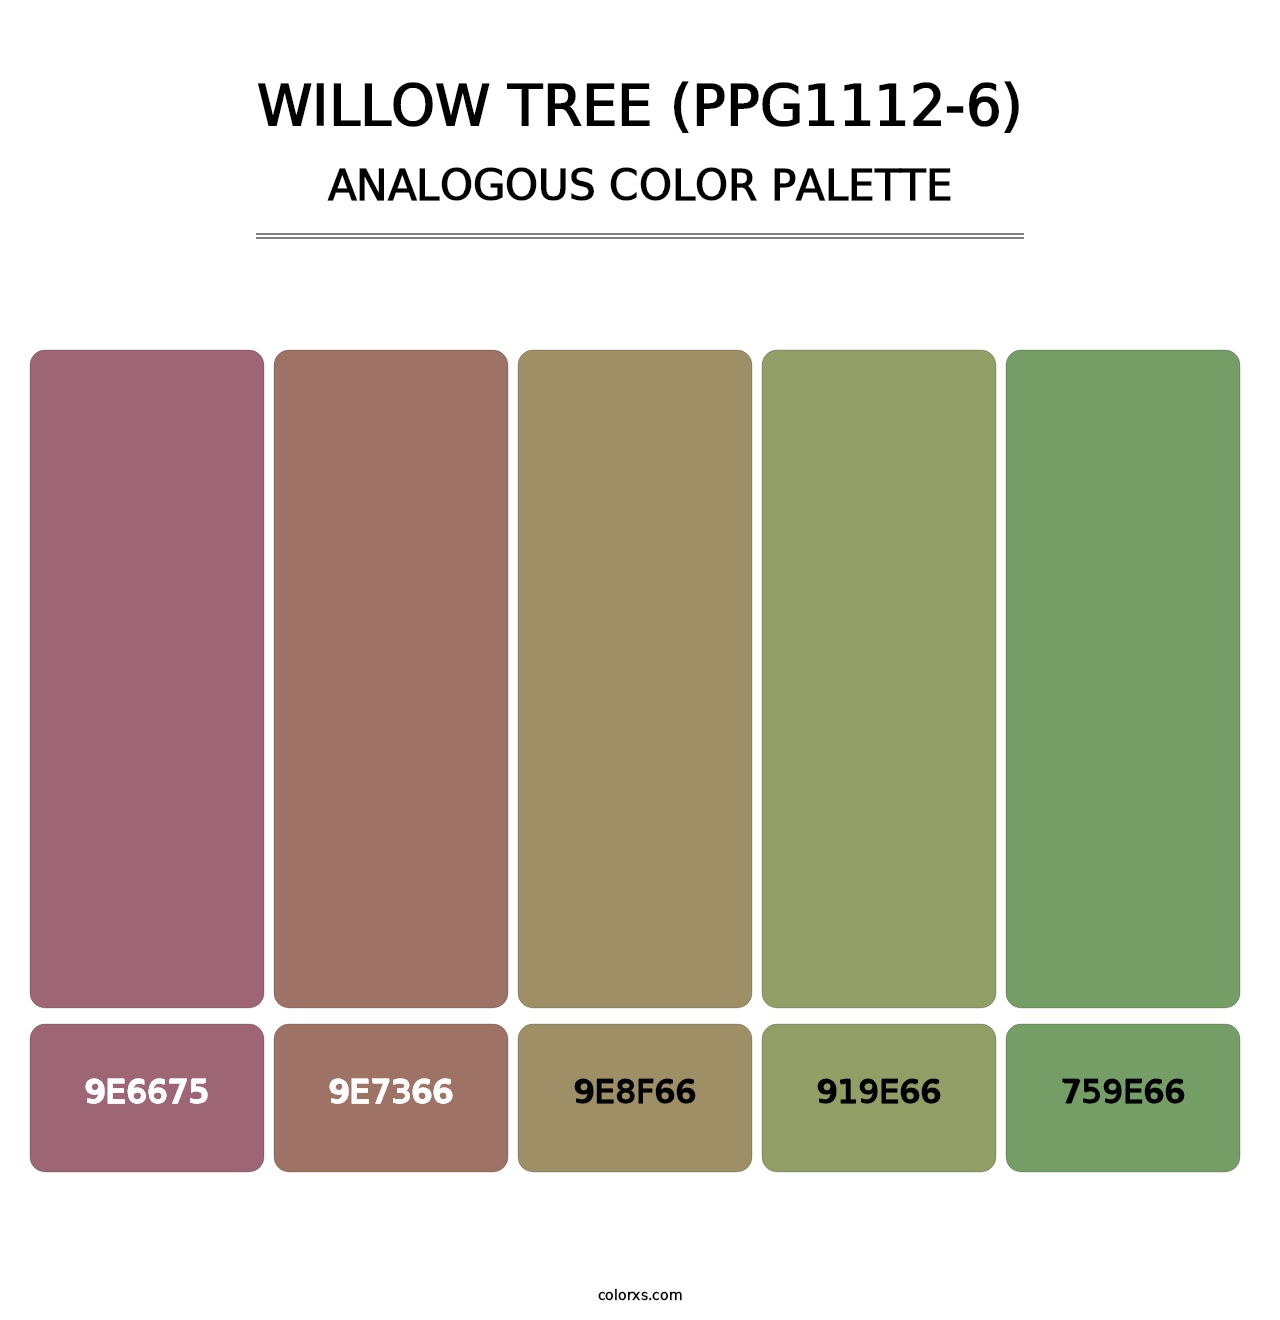 Willow Tree (PPG1112-6) - Analogous Color Palette